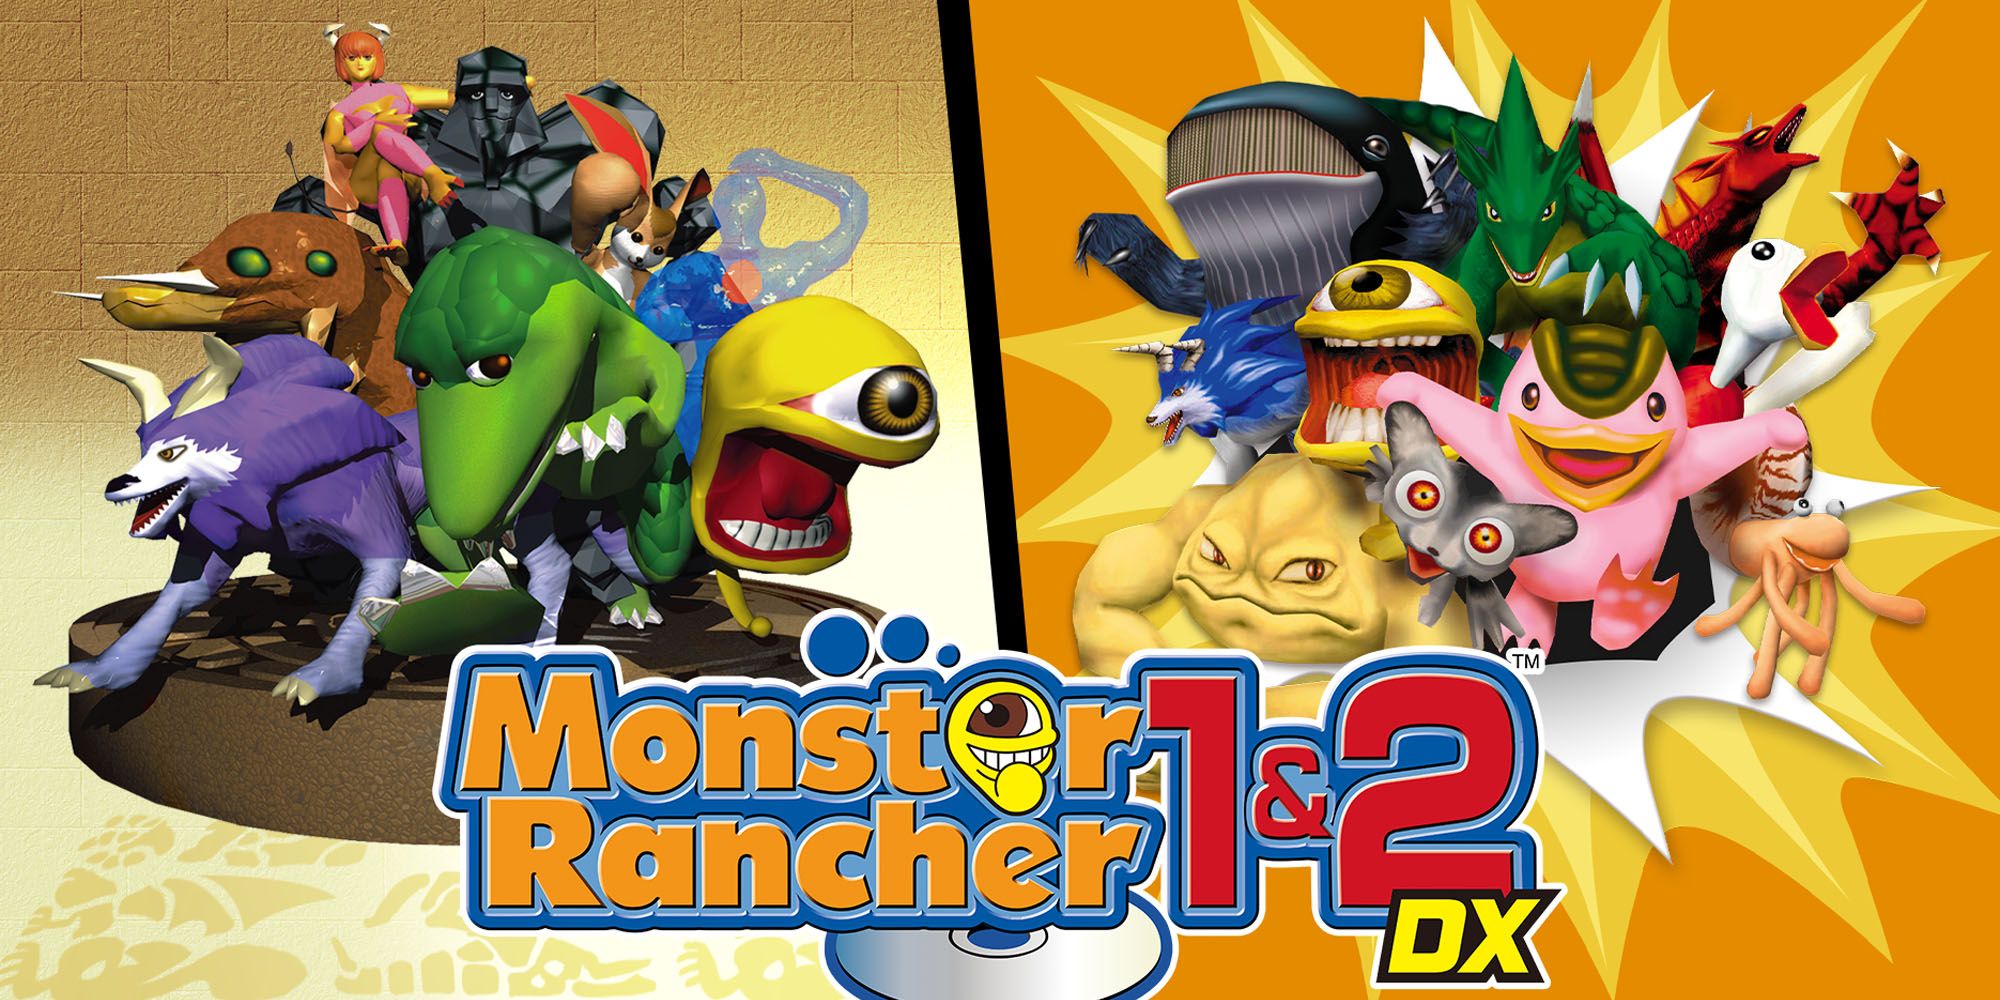 Things We Wish We Knew Before Starting Monster Rancher 1 & 2 DX